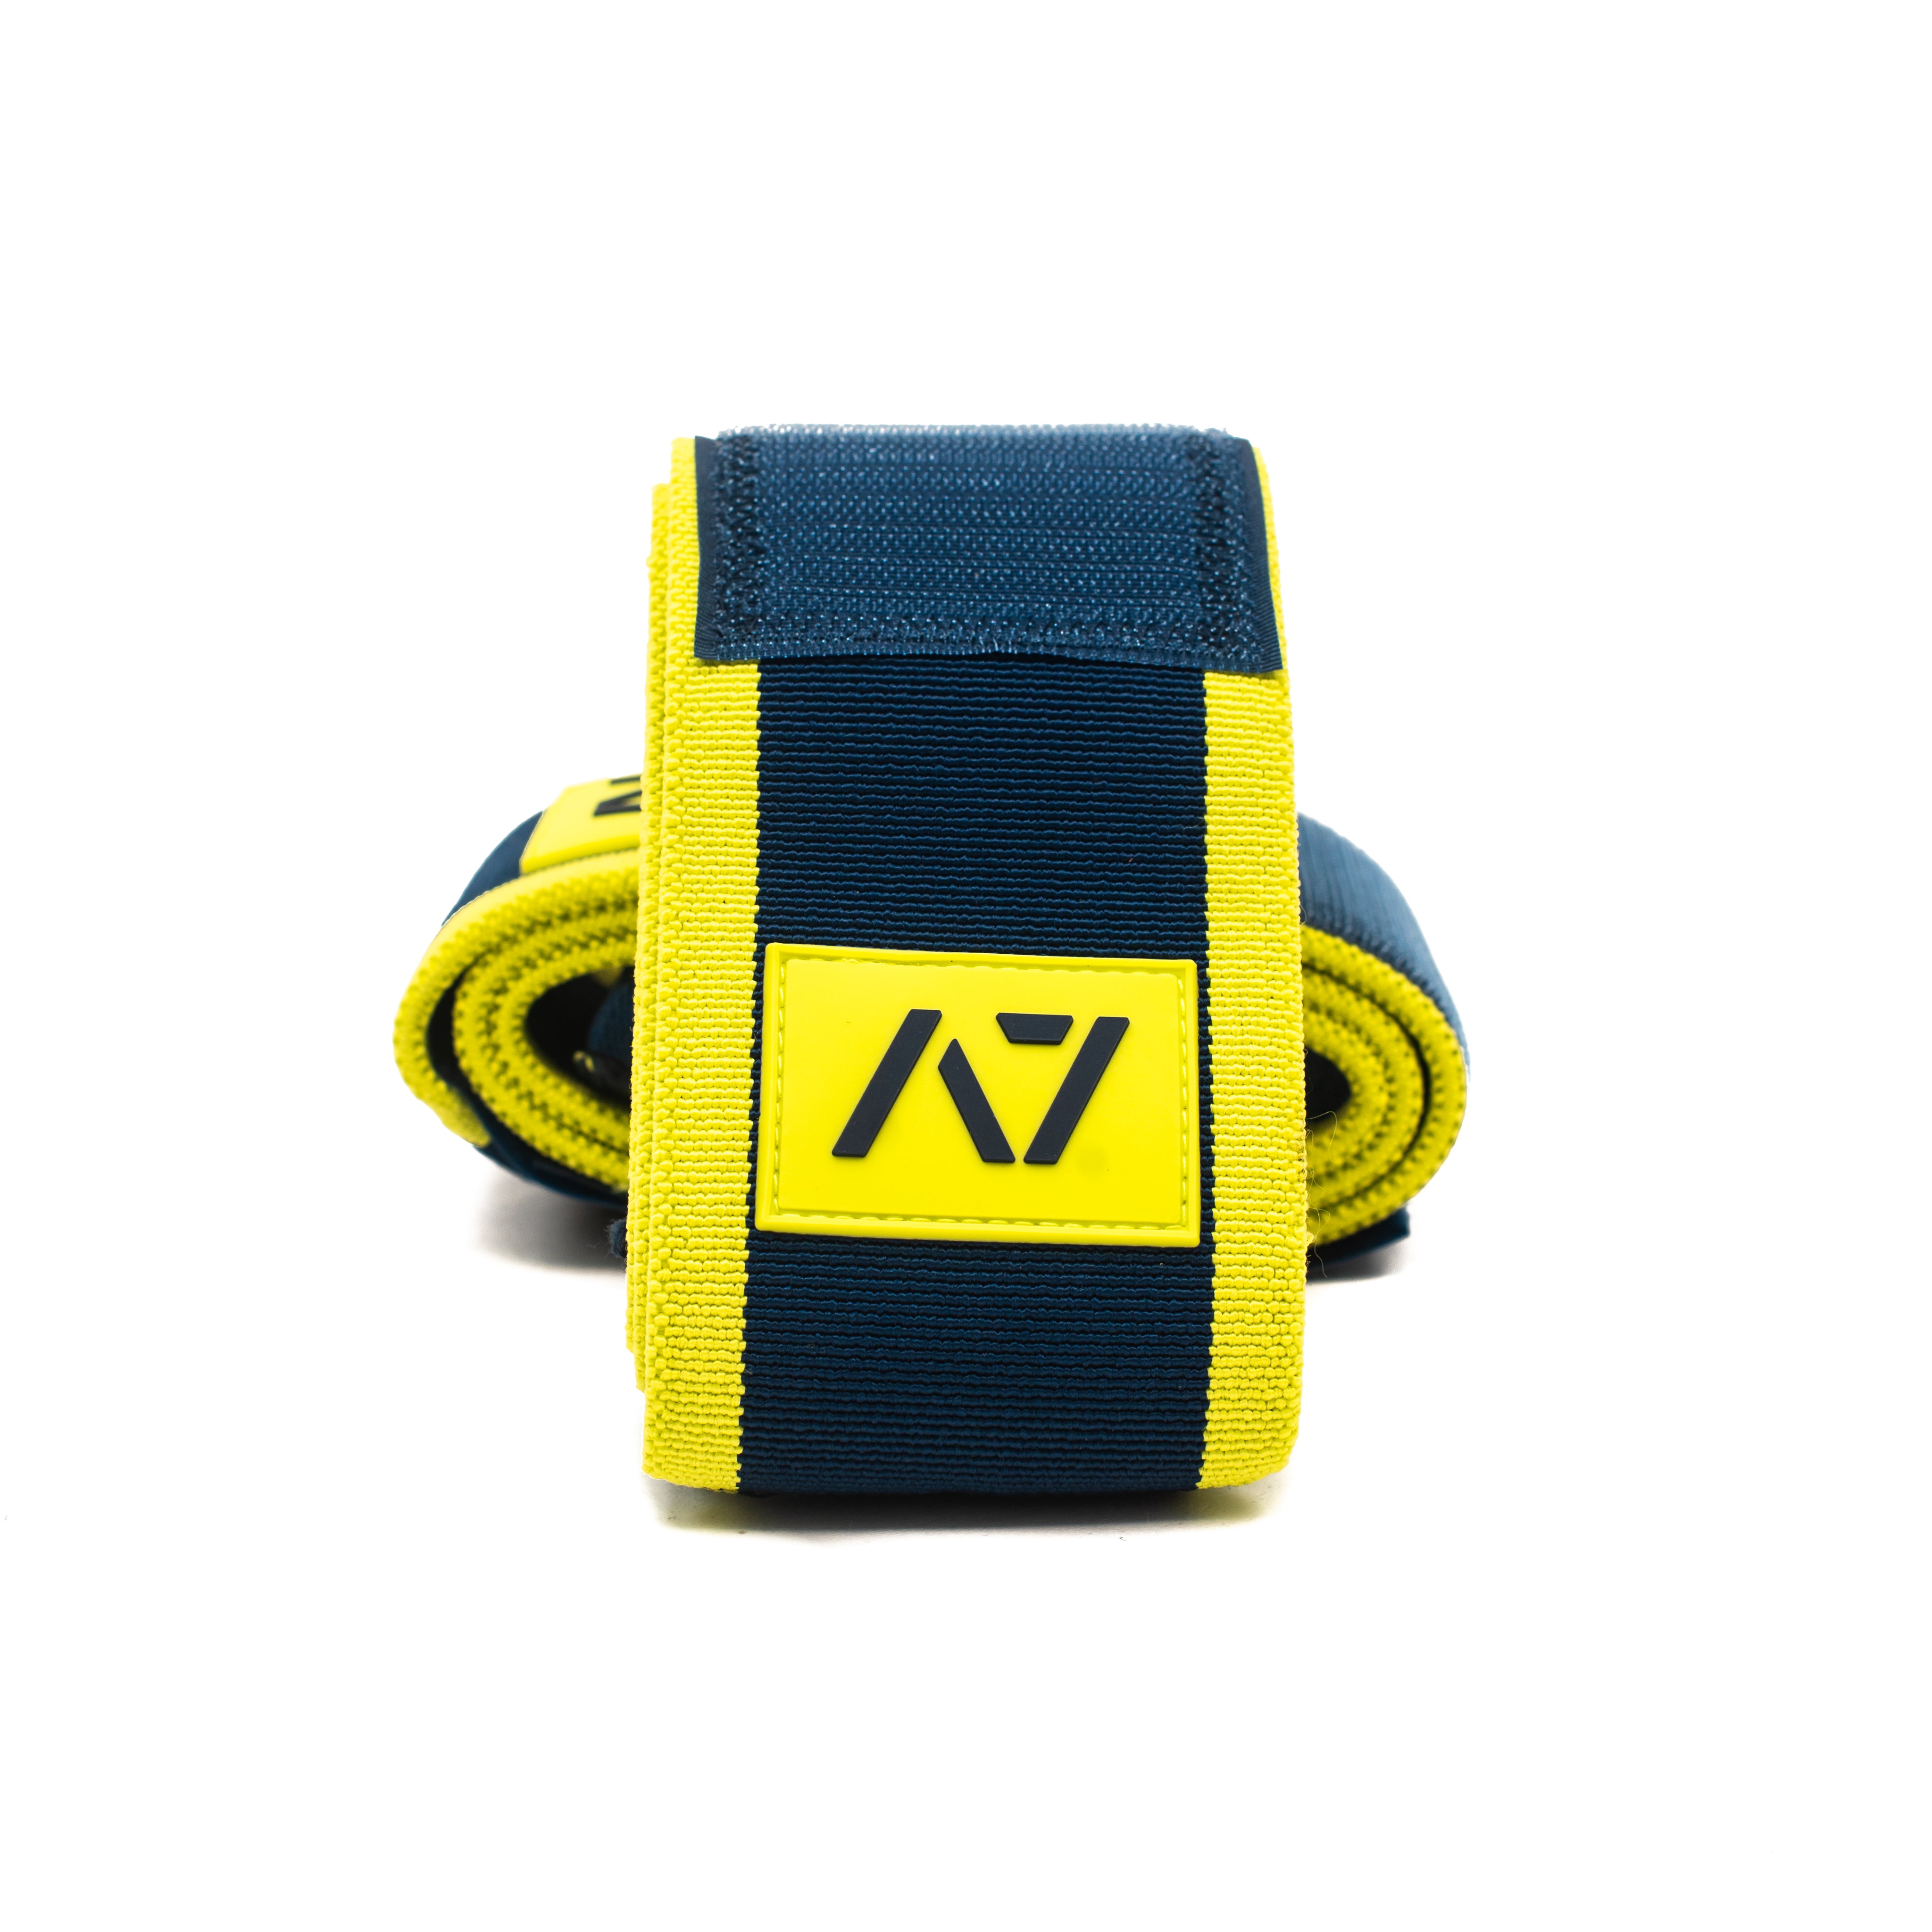 The Signature Gold Wrist Wraps are IPF Approved since the 90's